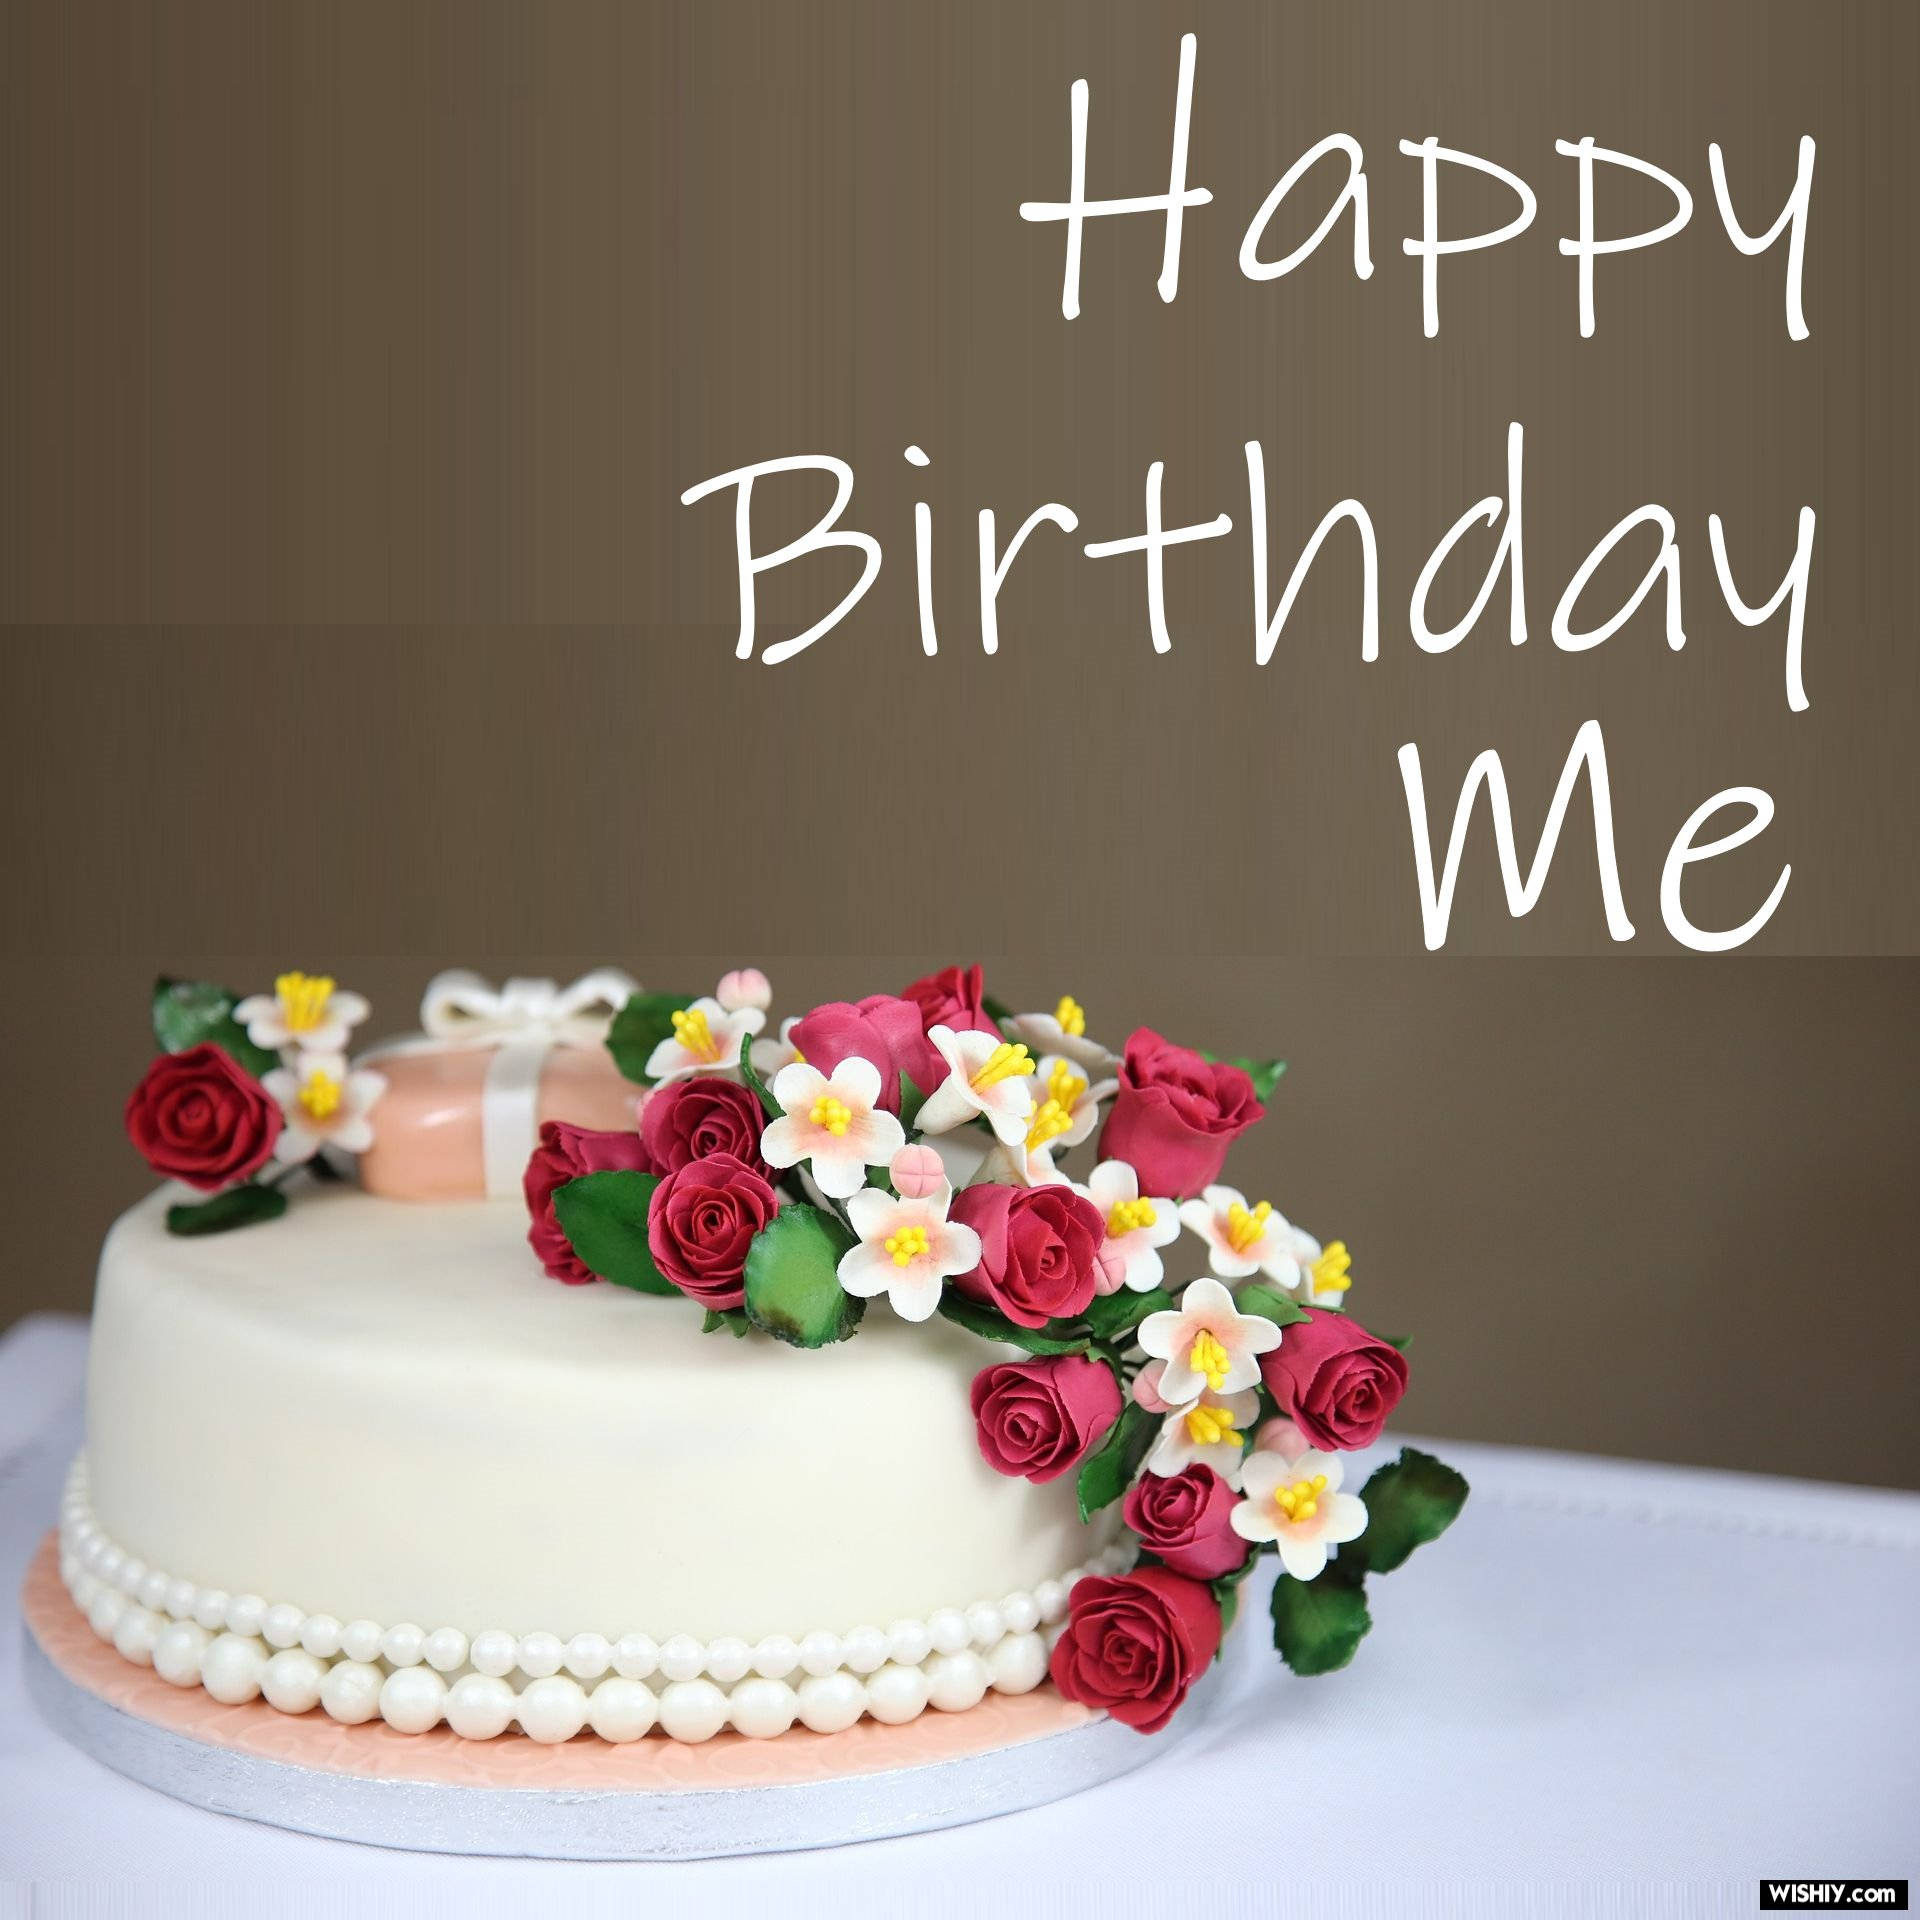 Free Happy Birthday To Me Wallpaper Downloads, [100+] Happy Birthday To Me  Wallpapers for FREE 